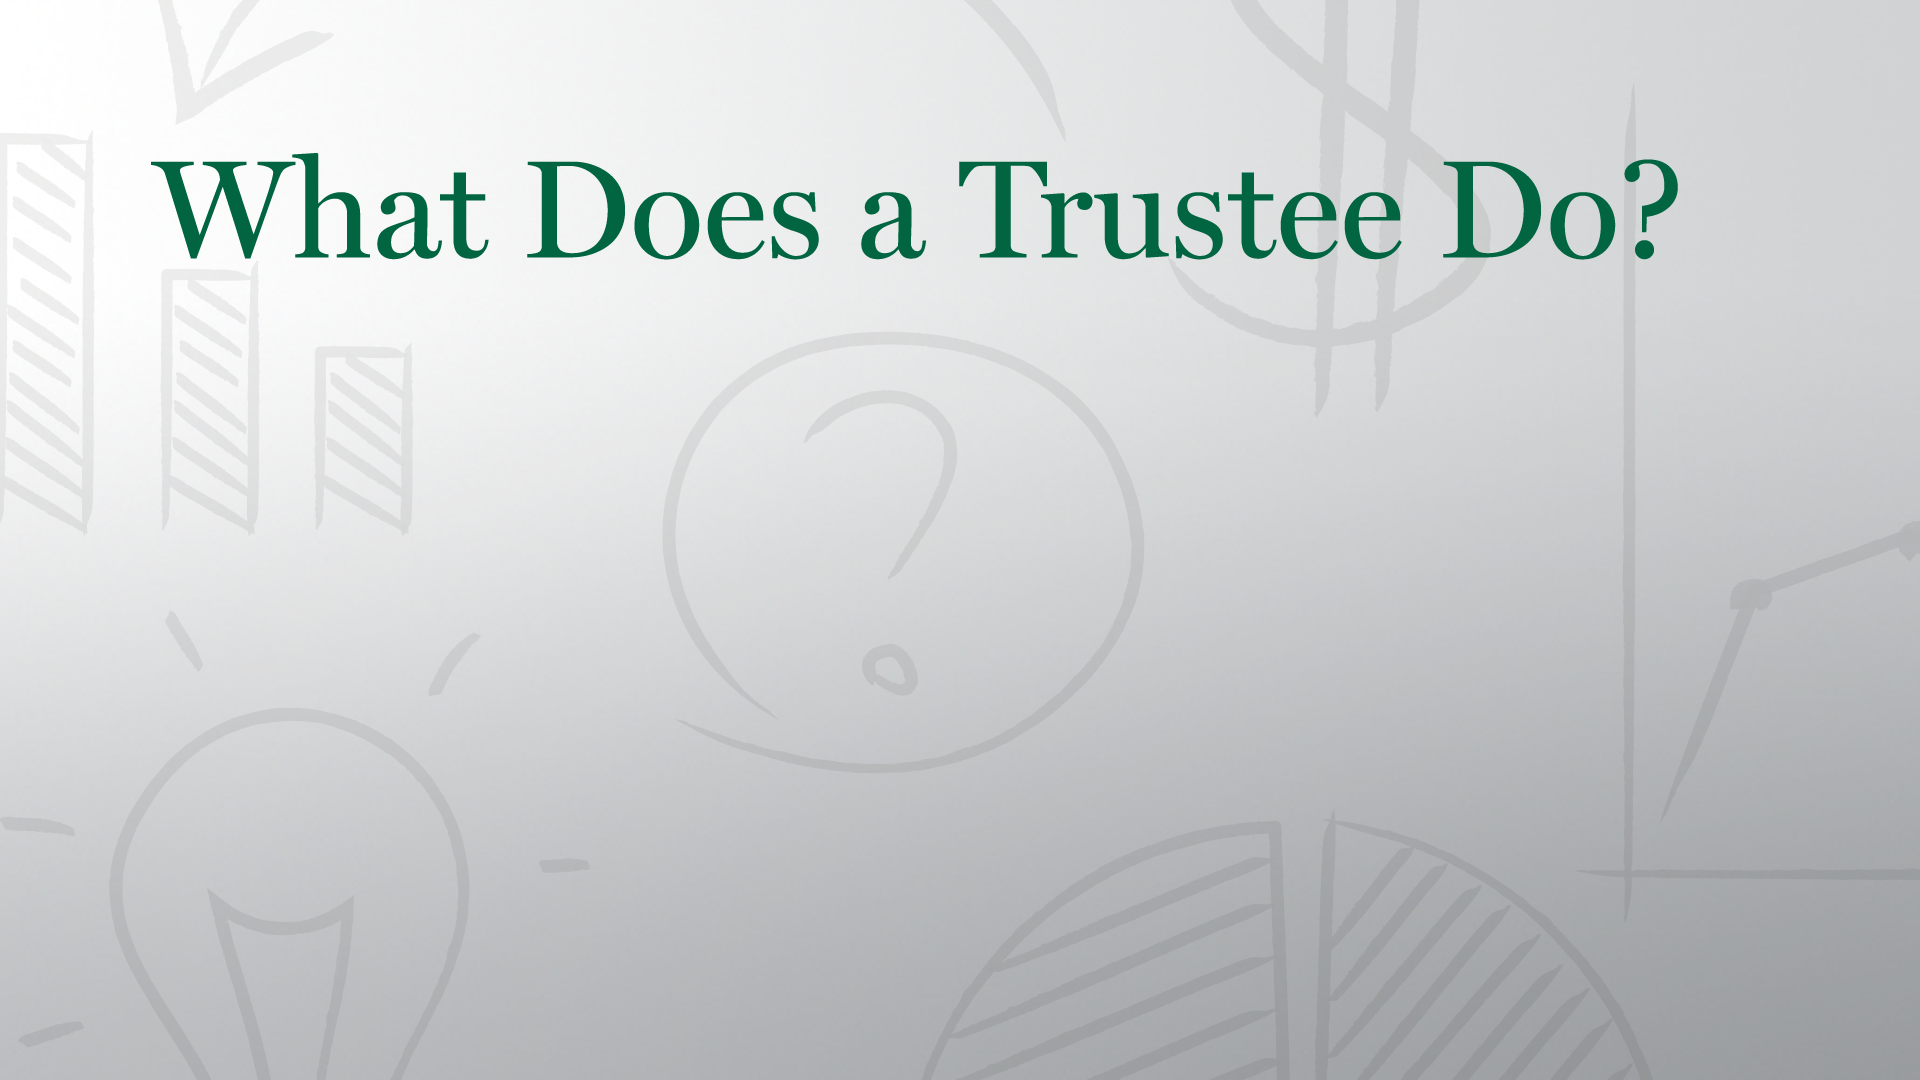 What Does a Trustee Do?